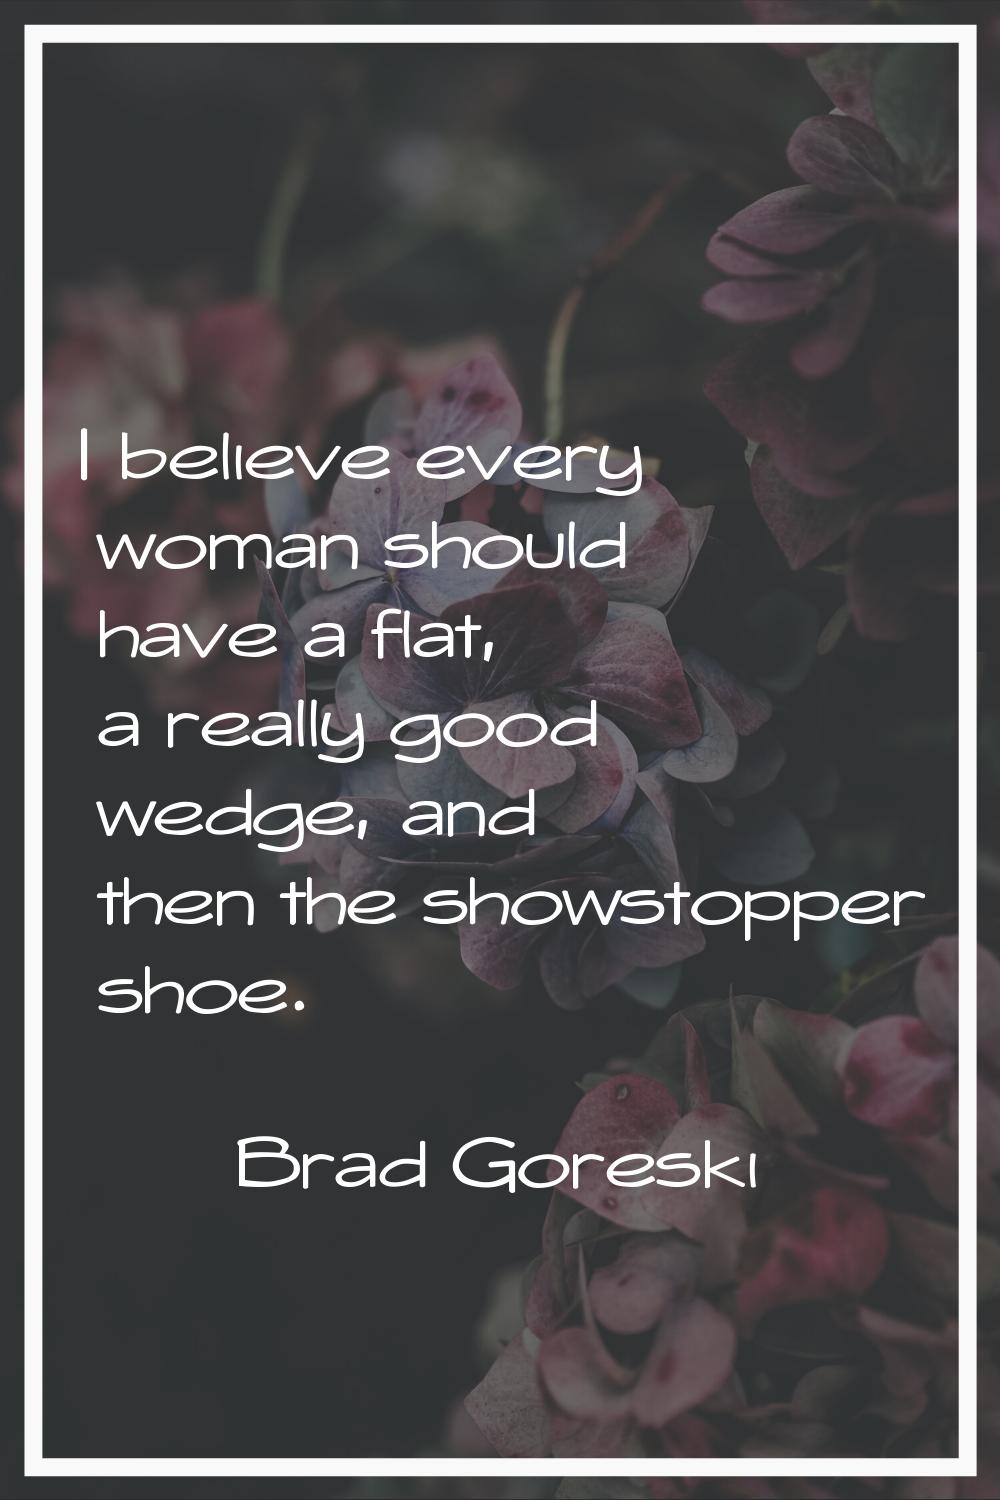 I believe every woman should have a flat, a really good wedge, and then the showstopper shoe.